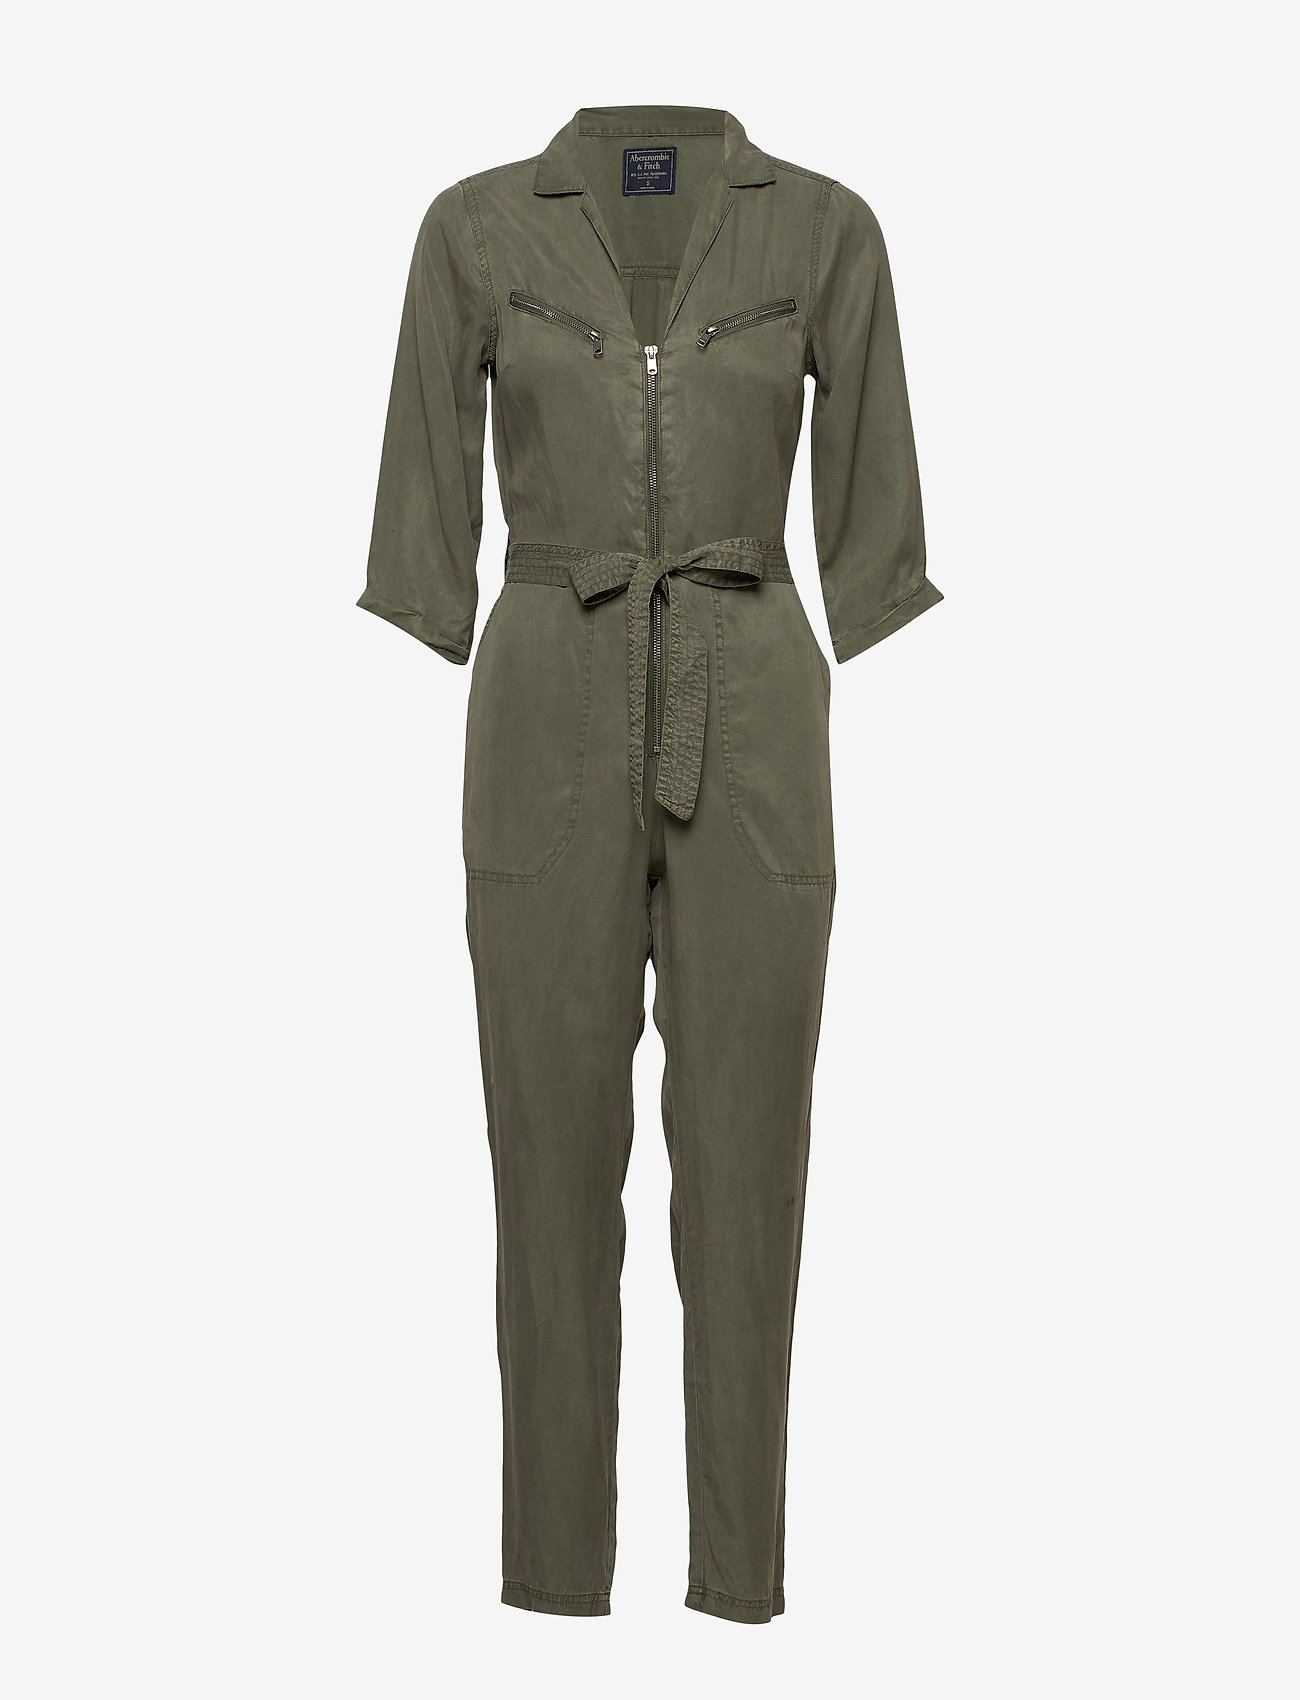 abercrombie and fitch jumpsuits